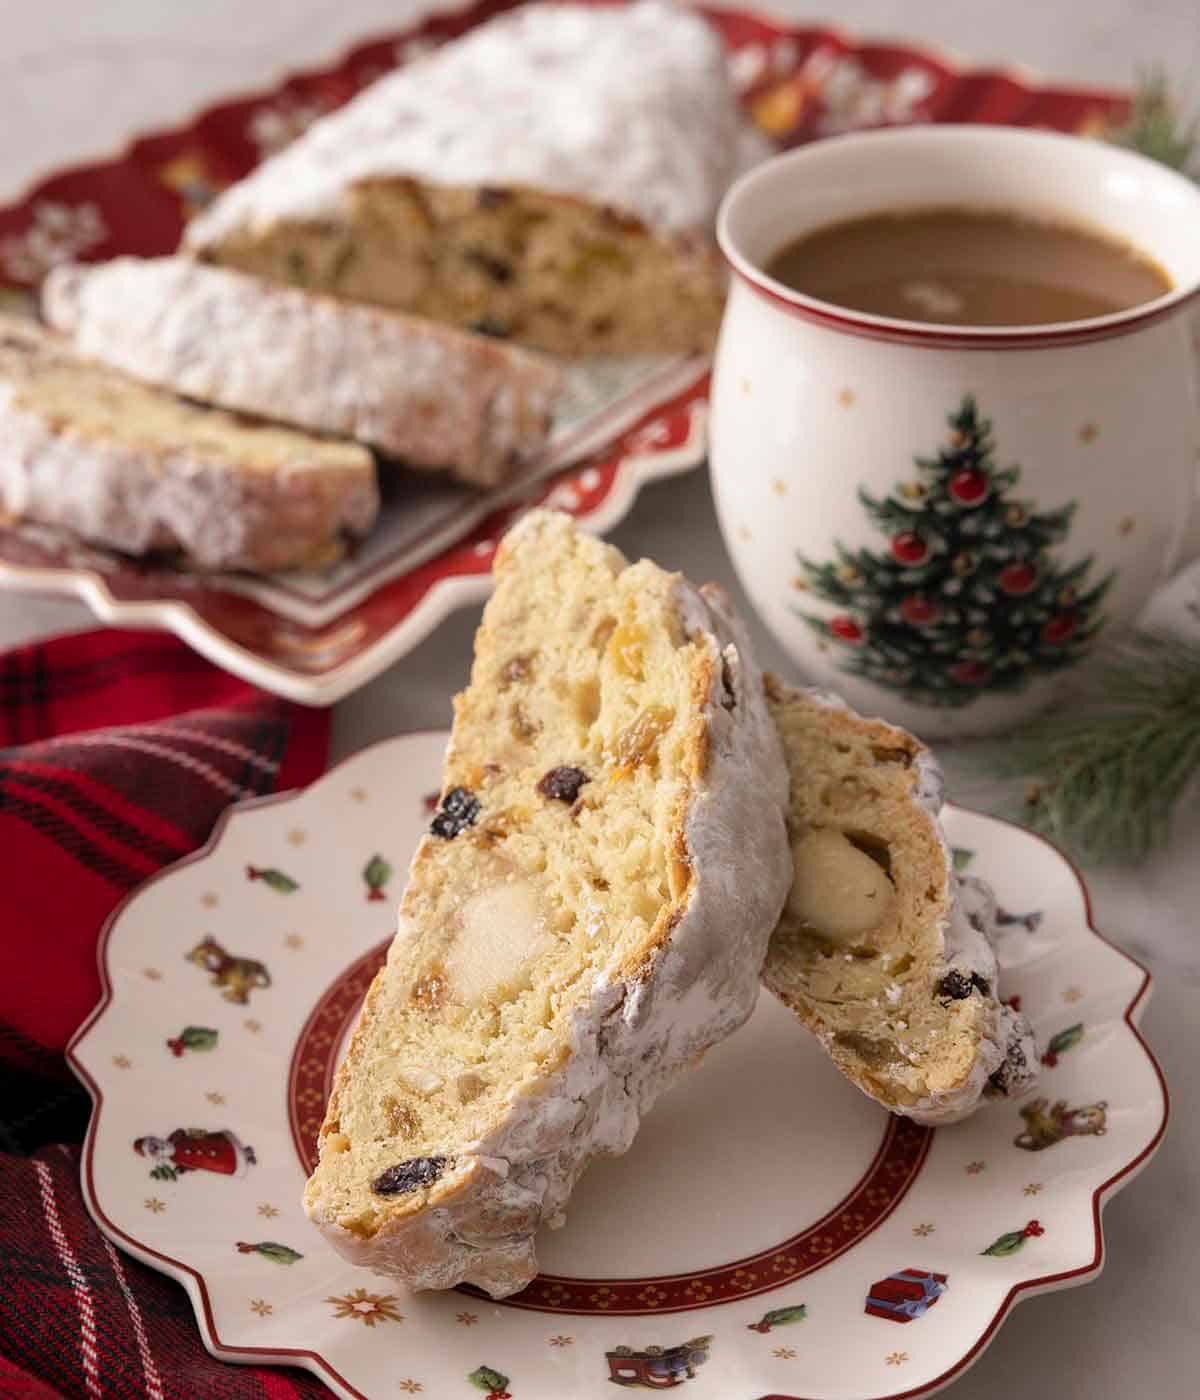 A plate with two slices of stollen by a mug of hot chocolate.